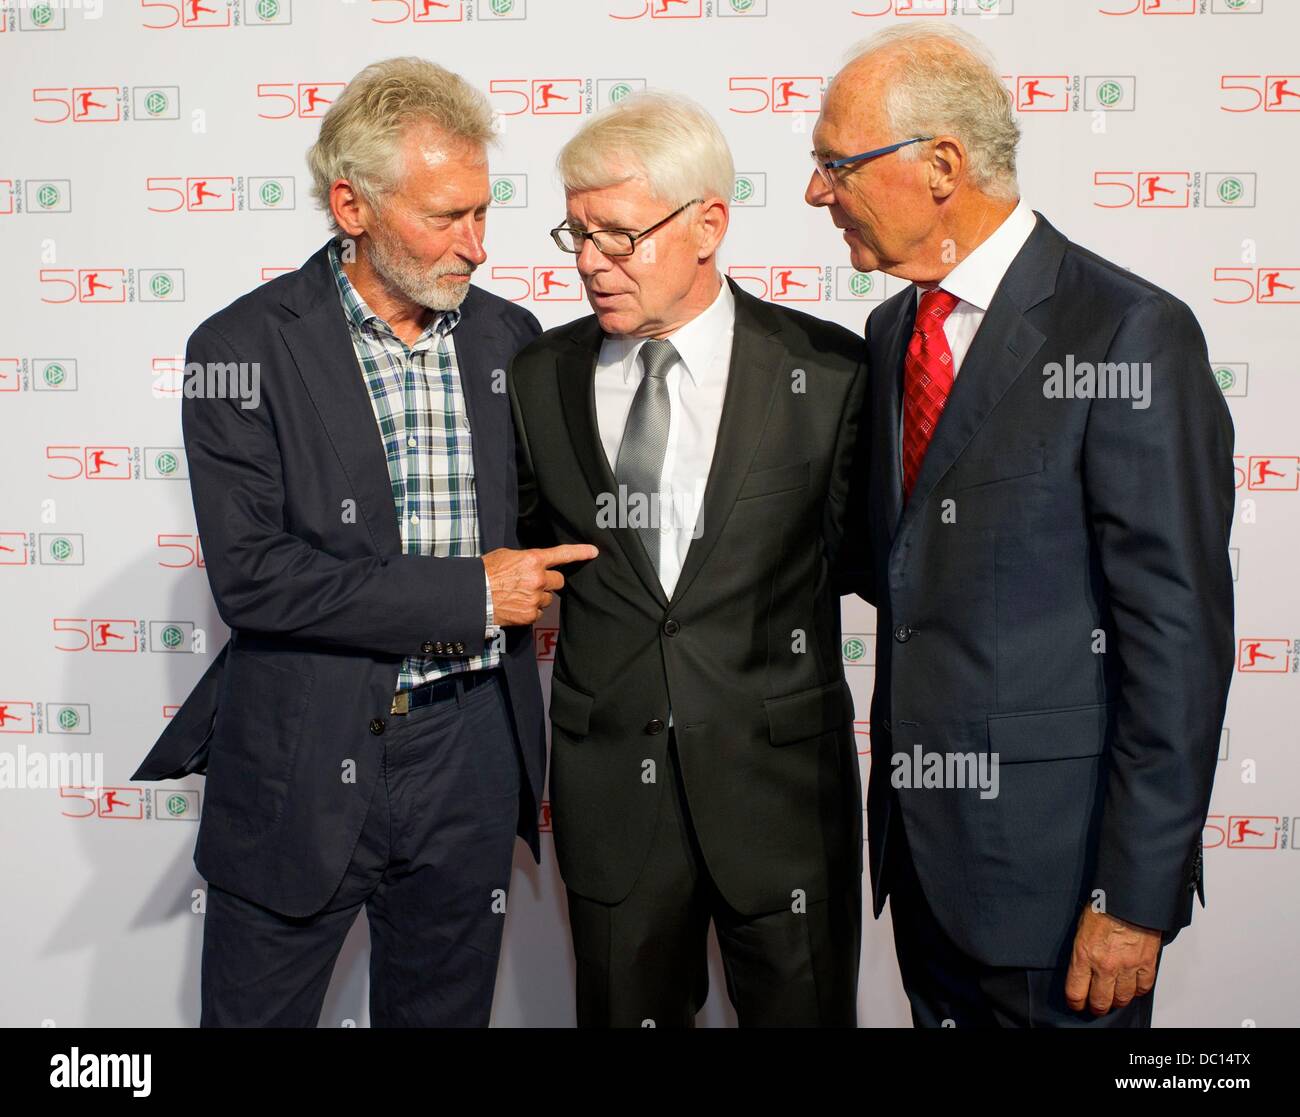 Berlin, Germany. 06th Aug, 2013. German Football League (DFL) President Reinhard Rauball (C) greets German soccer legends Franz Beckenbauer (R) and Paul Breitner (L) prior to an event to celebrate the 50th anniversary of the German Bundesliga in Berlin, Germany, 06 August 2013. Photo: Tim Brakemeier/dpa/Alamy Live News Stock Photo